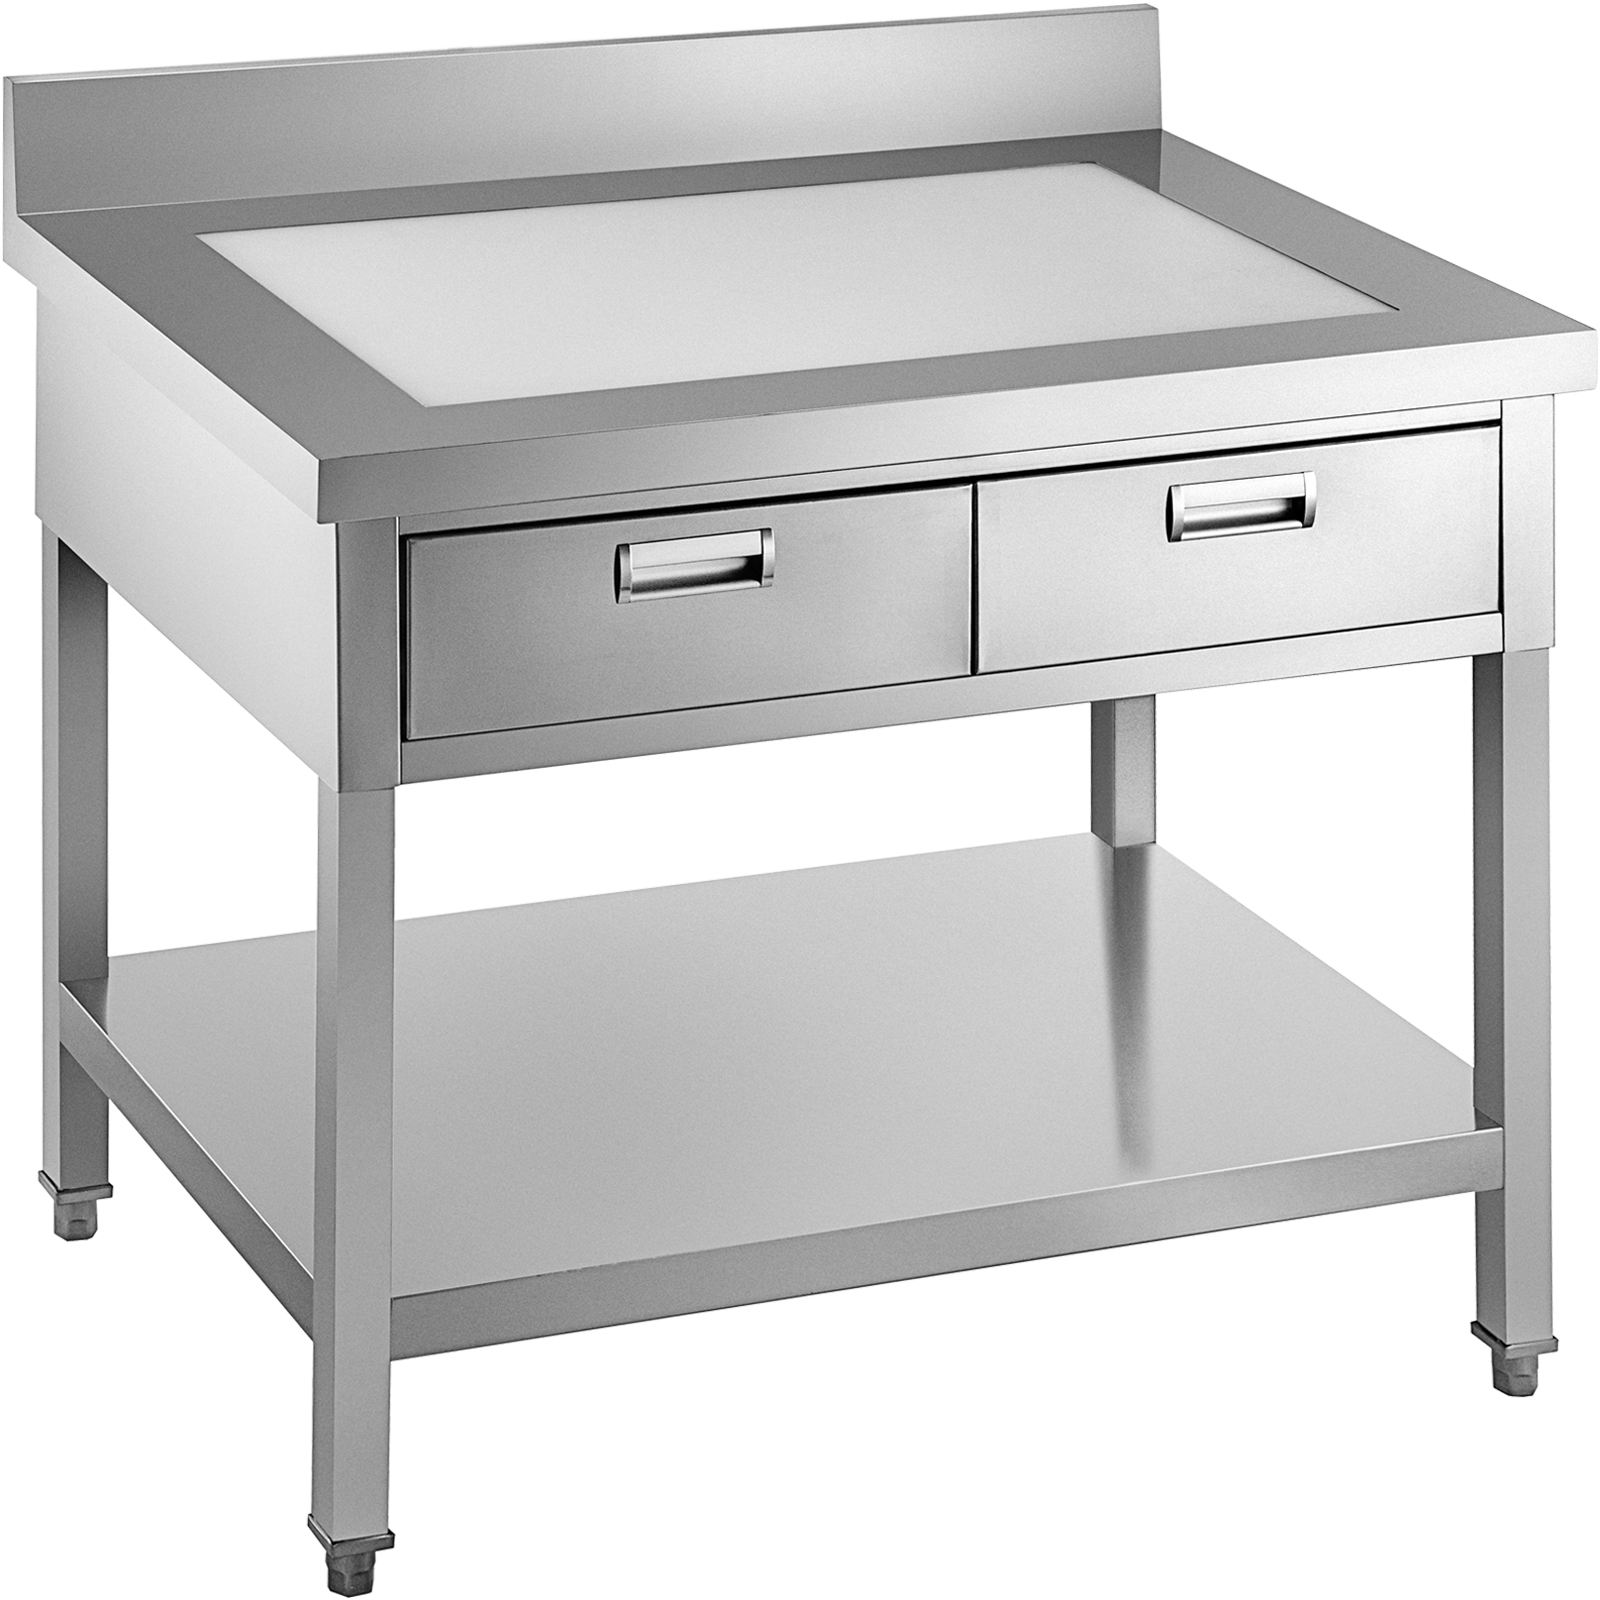 Vevor Commercial 24"x36" Stainless Steel Work Prep Table Workstation W/ Drawers от Vevor Many GEOs